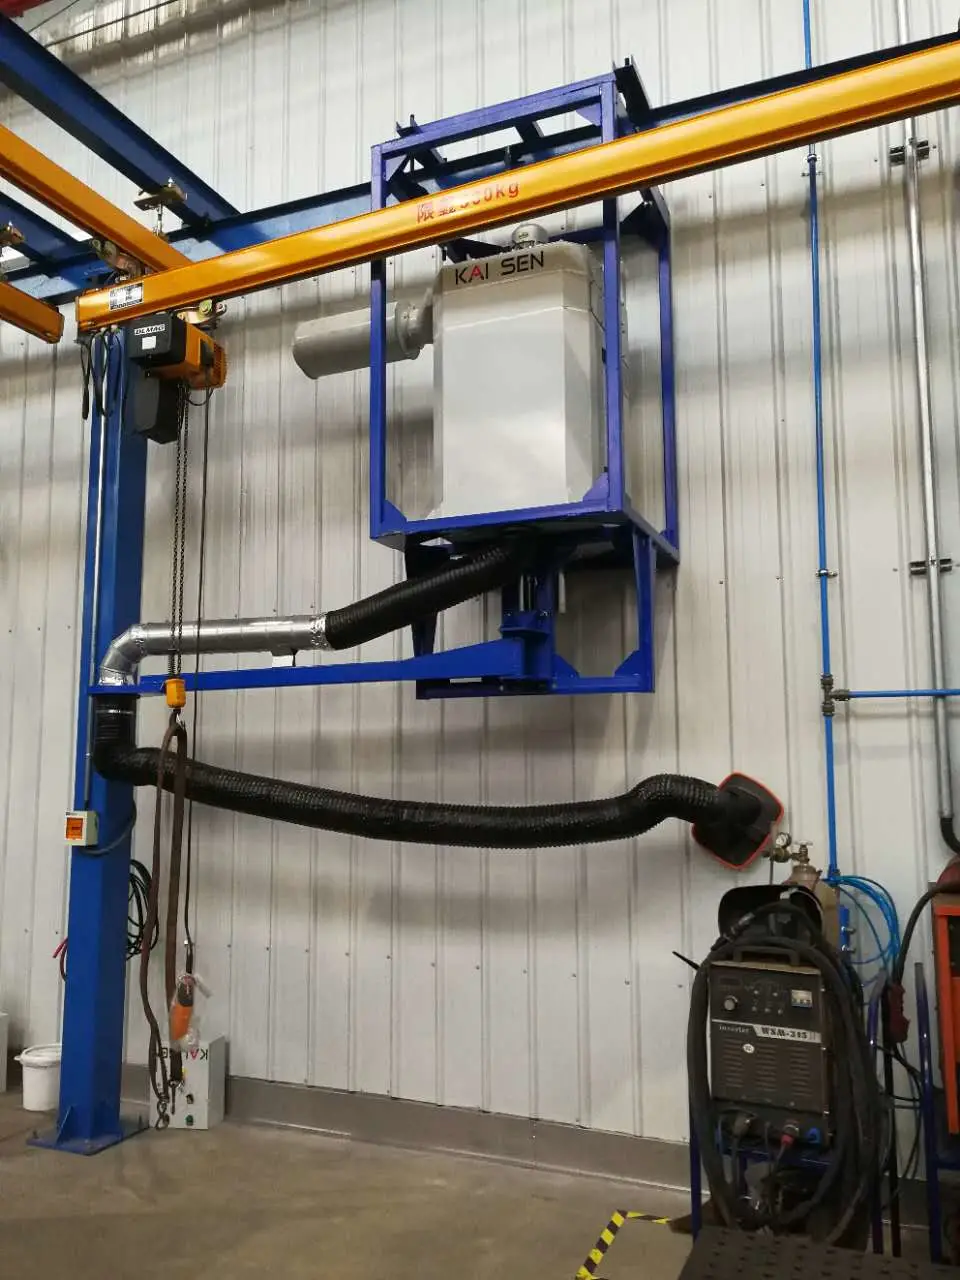 Wall Mounted Welding Fume Extractor/Filtration System for Welding, Dust Filter